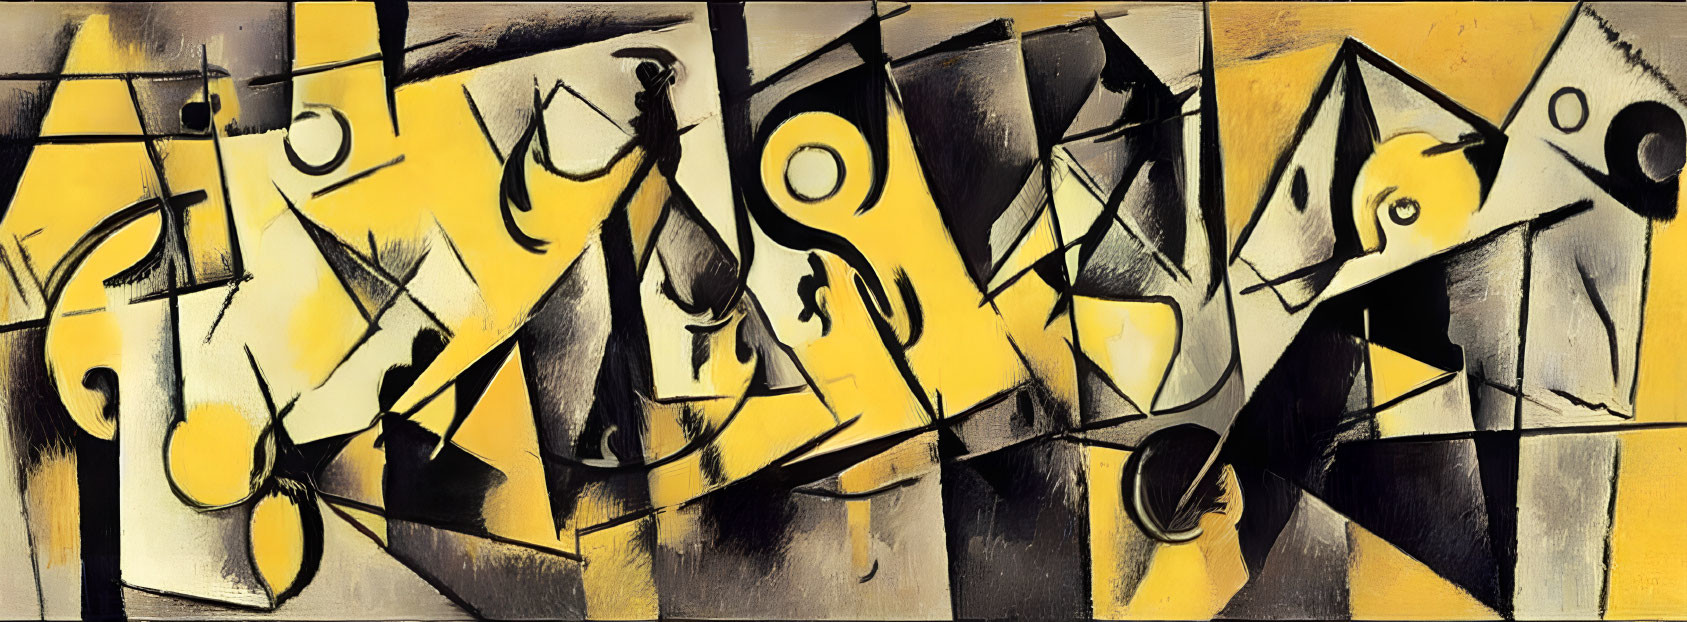 Abstract Picasso-style Painting with Disjointed Figures and Geometric Shapes in Black, Yellow, and White